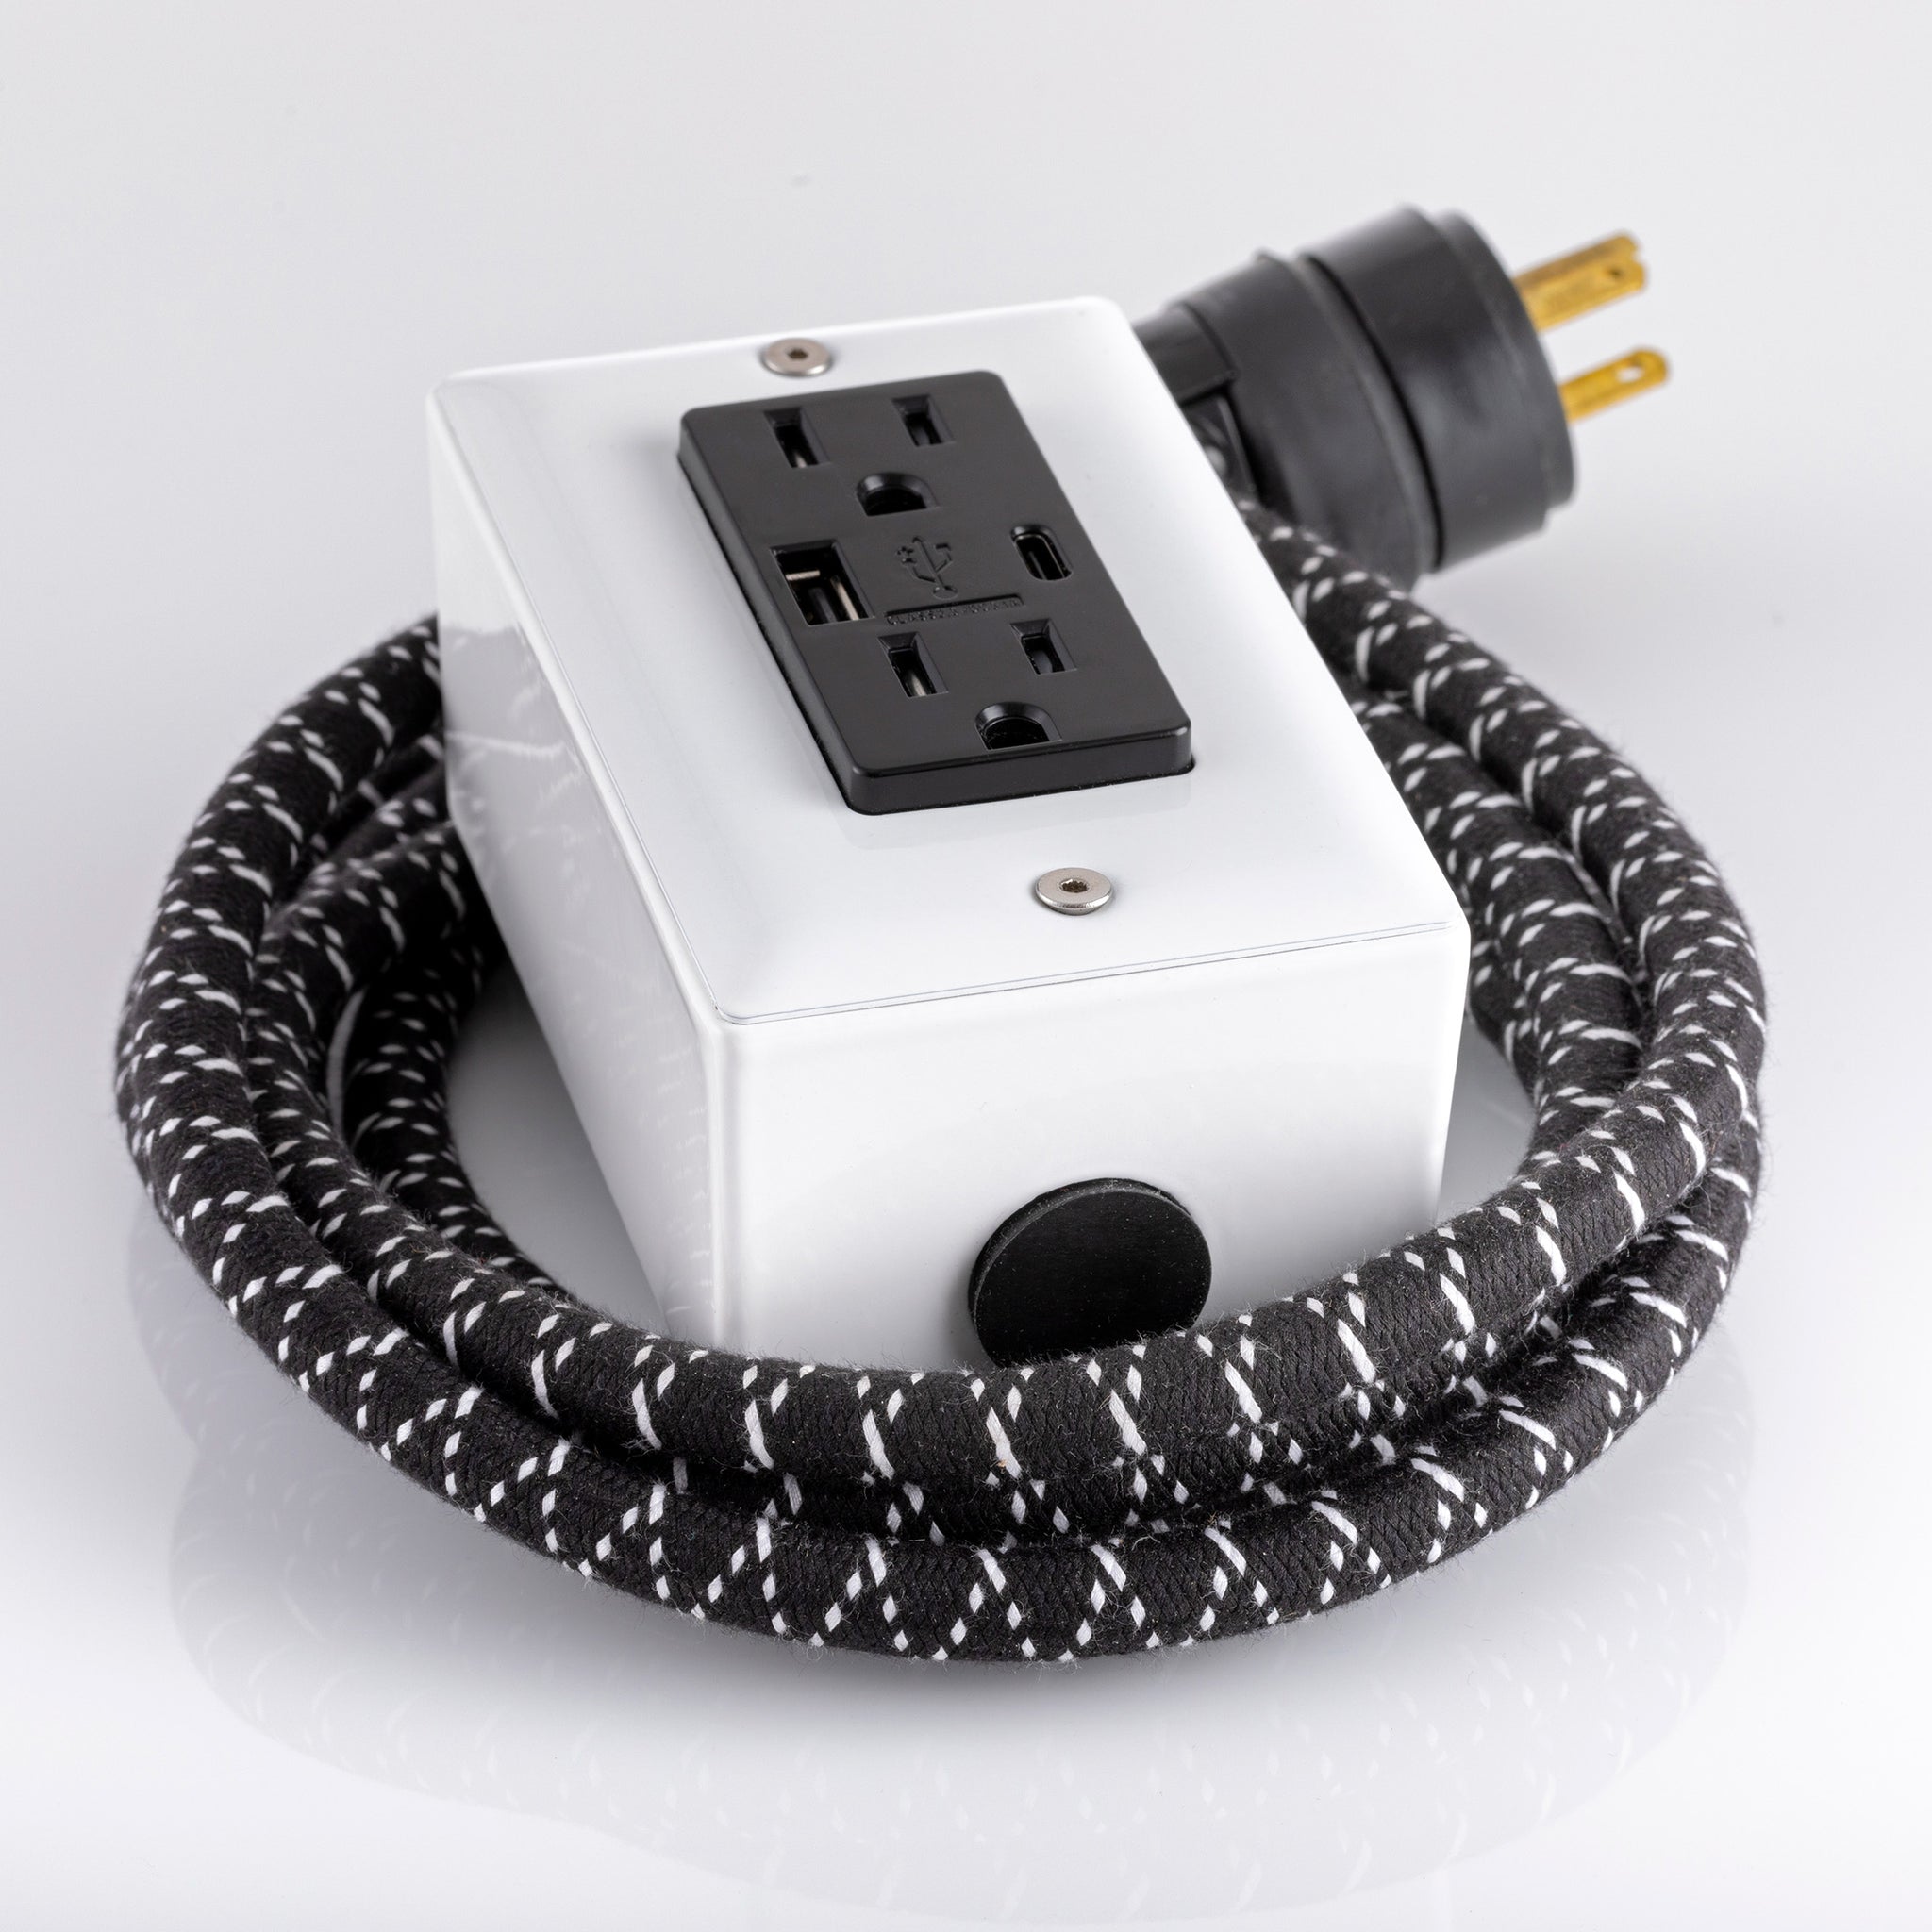 New! The First Smart Chip USB Type C® Extension Cord - 8' Extō USBA/USBC Port, Dual-Outlet Power Cord